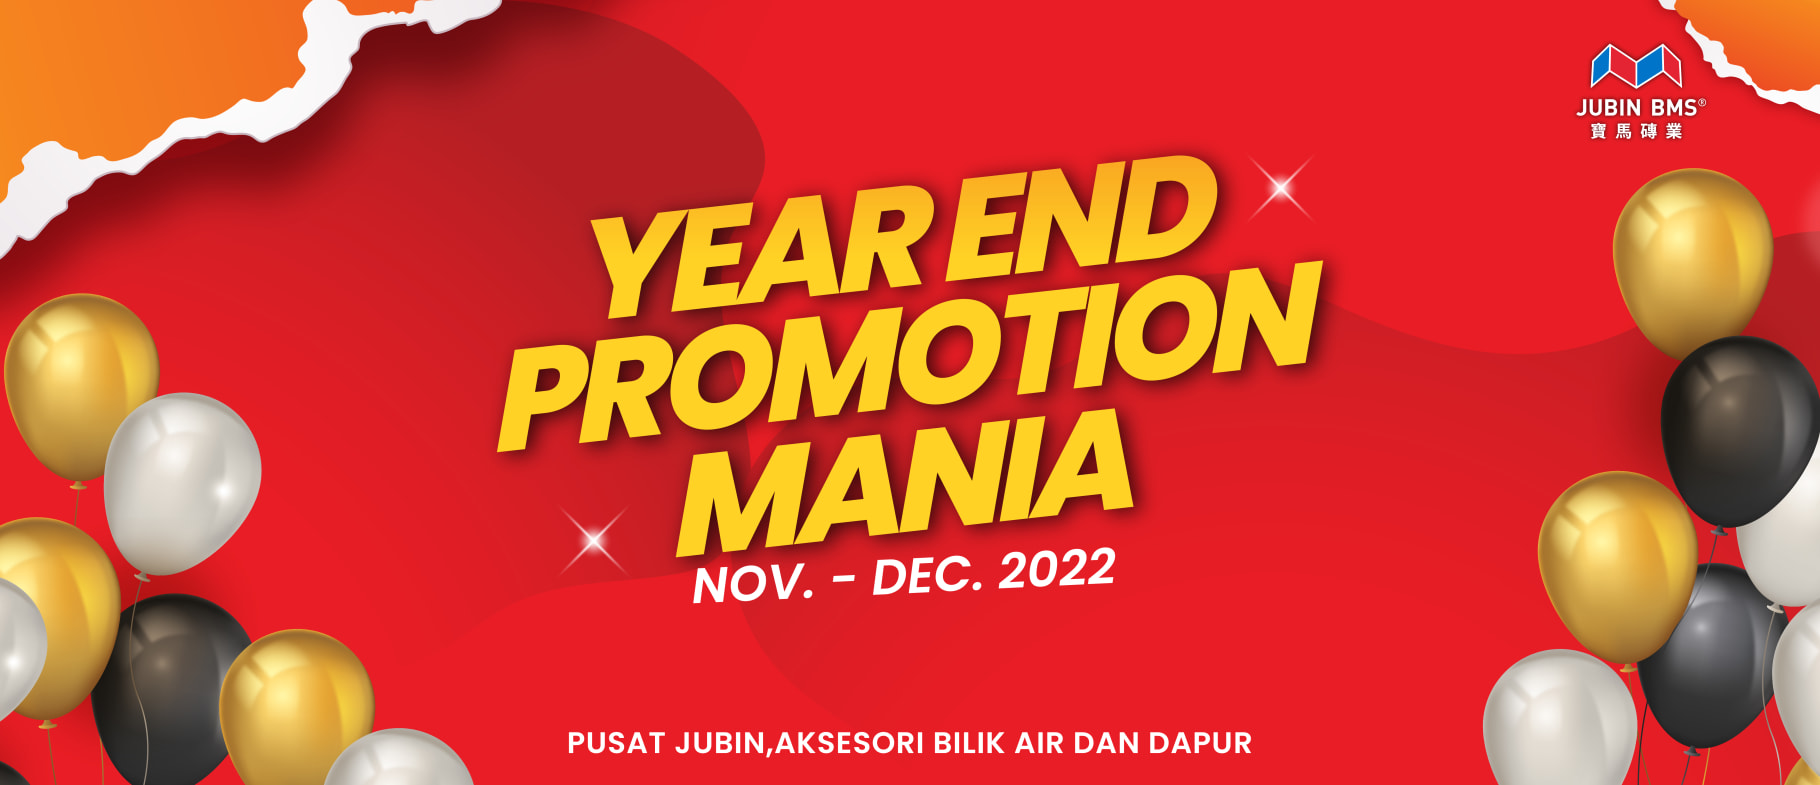 2022 YEAR END PROMOTION